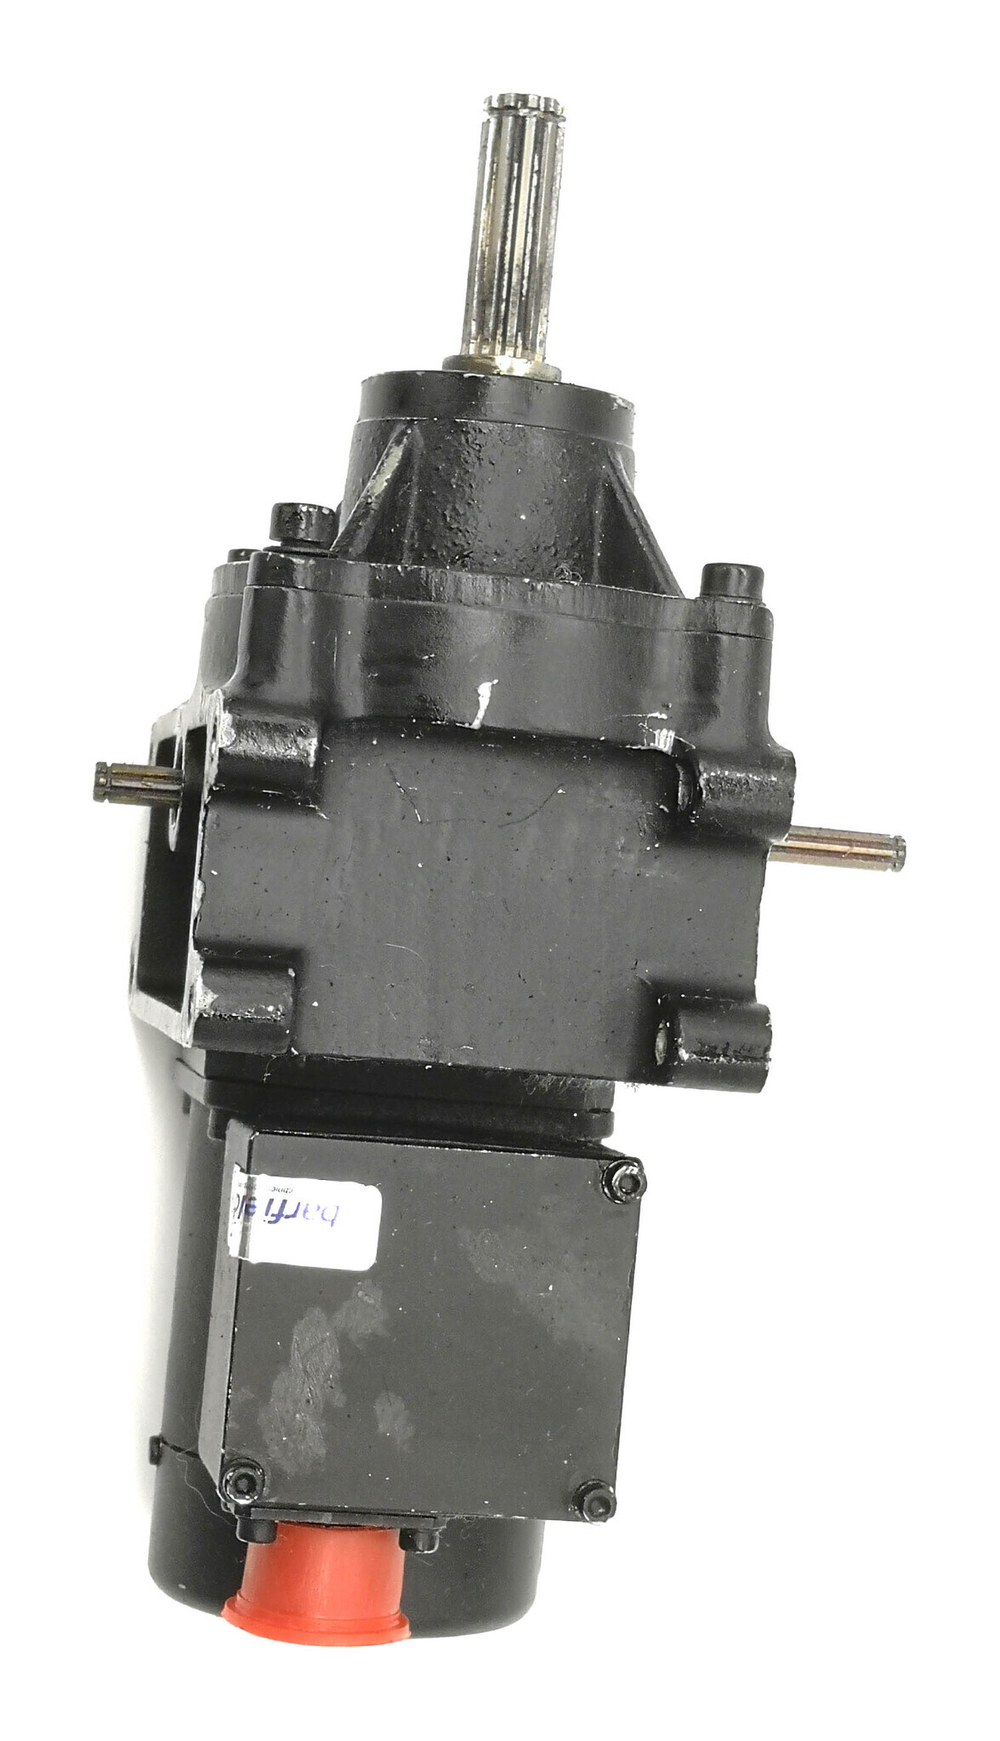 Arus(f1549)rotary actuator AD8650501